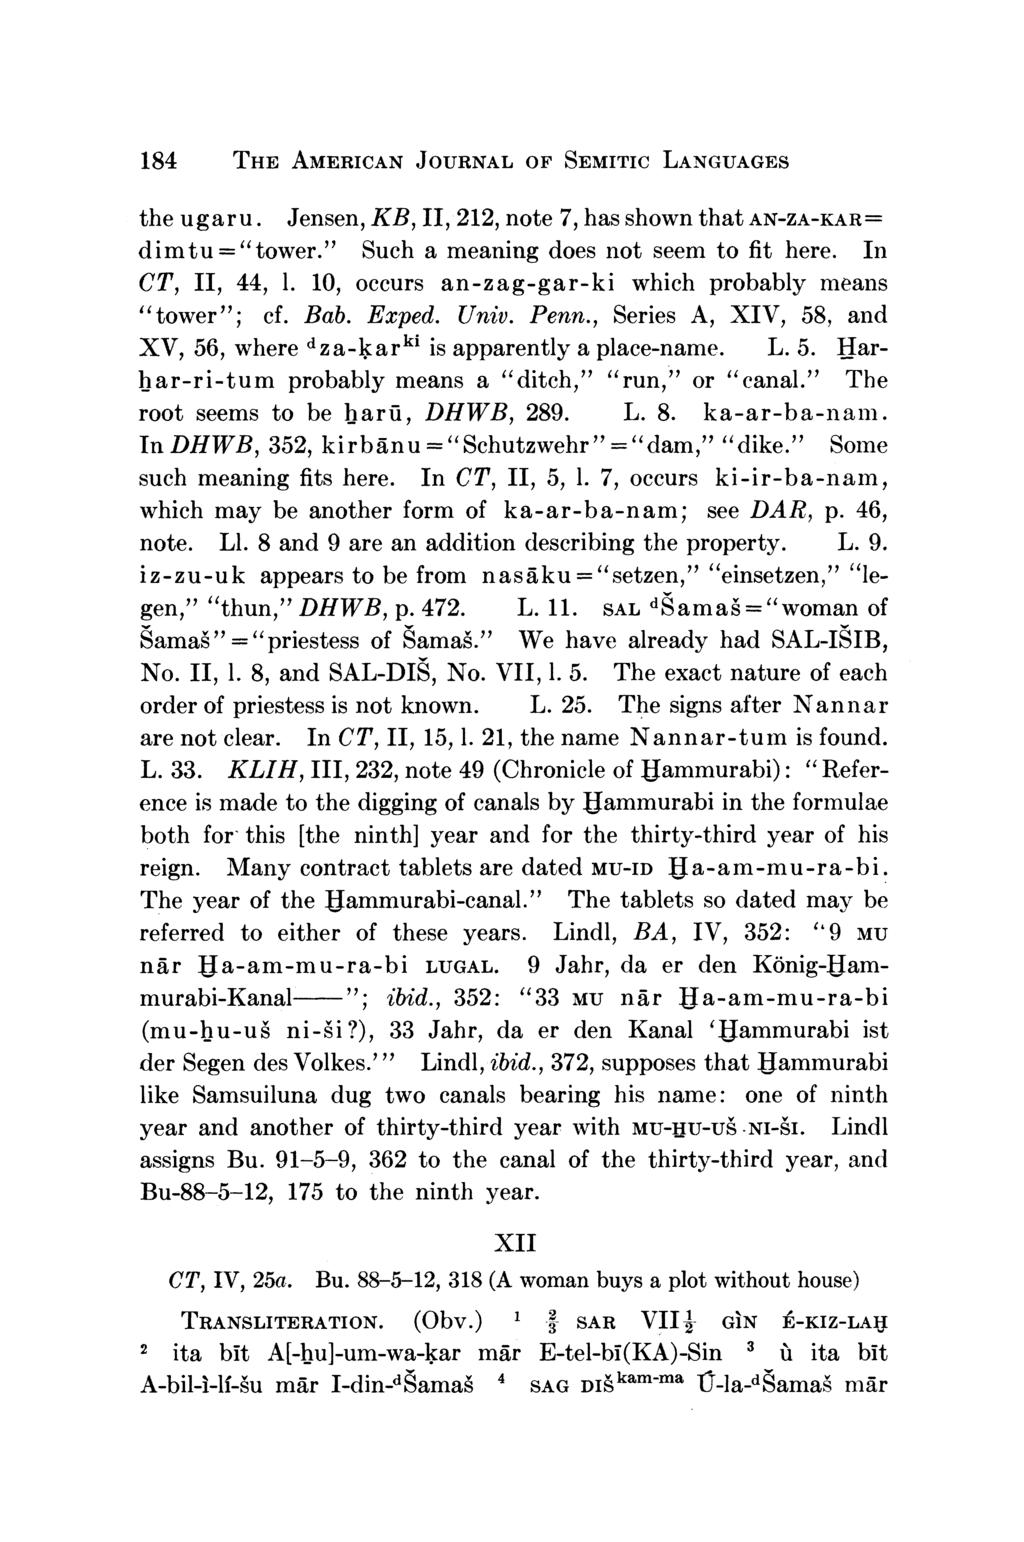 184 THE AMERICAN JOURNAL OF SEMITIC LANGUAGES the ugaru. Jensen, KB, II, 212, note 7, has shown that AN-ZA-KAR= dimtu="tower." Such a meaning does not seem to fit here. In CT, II, 44, 1.